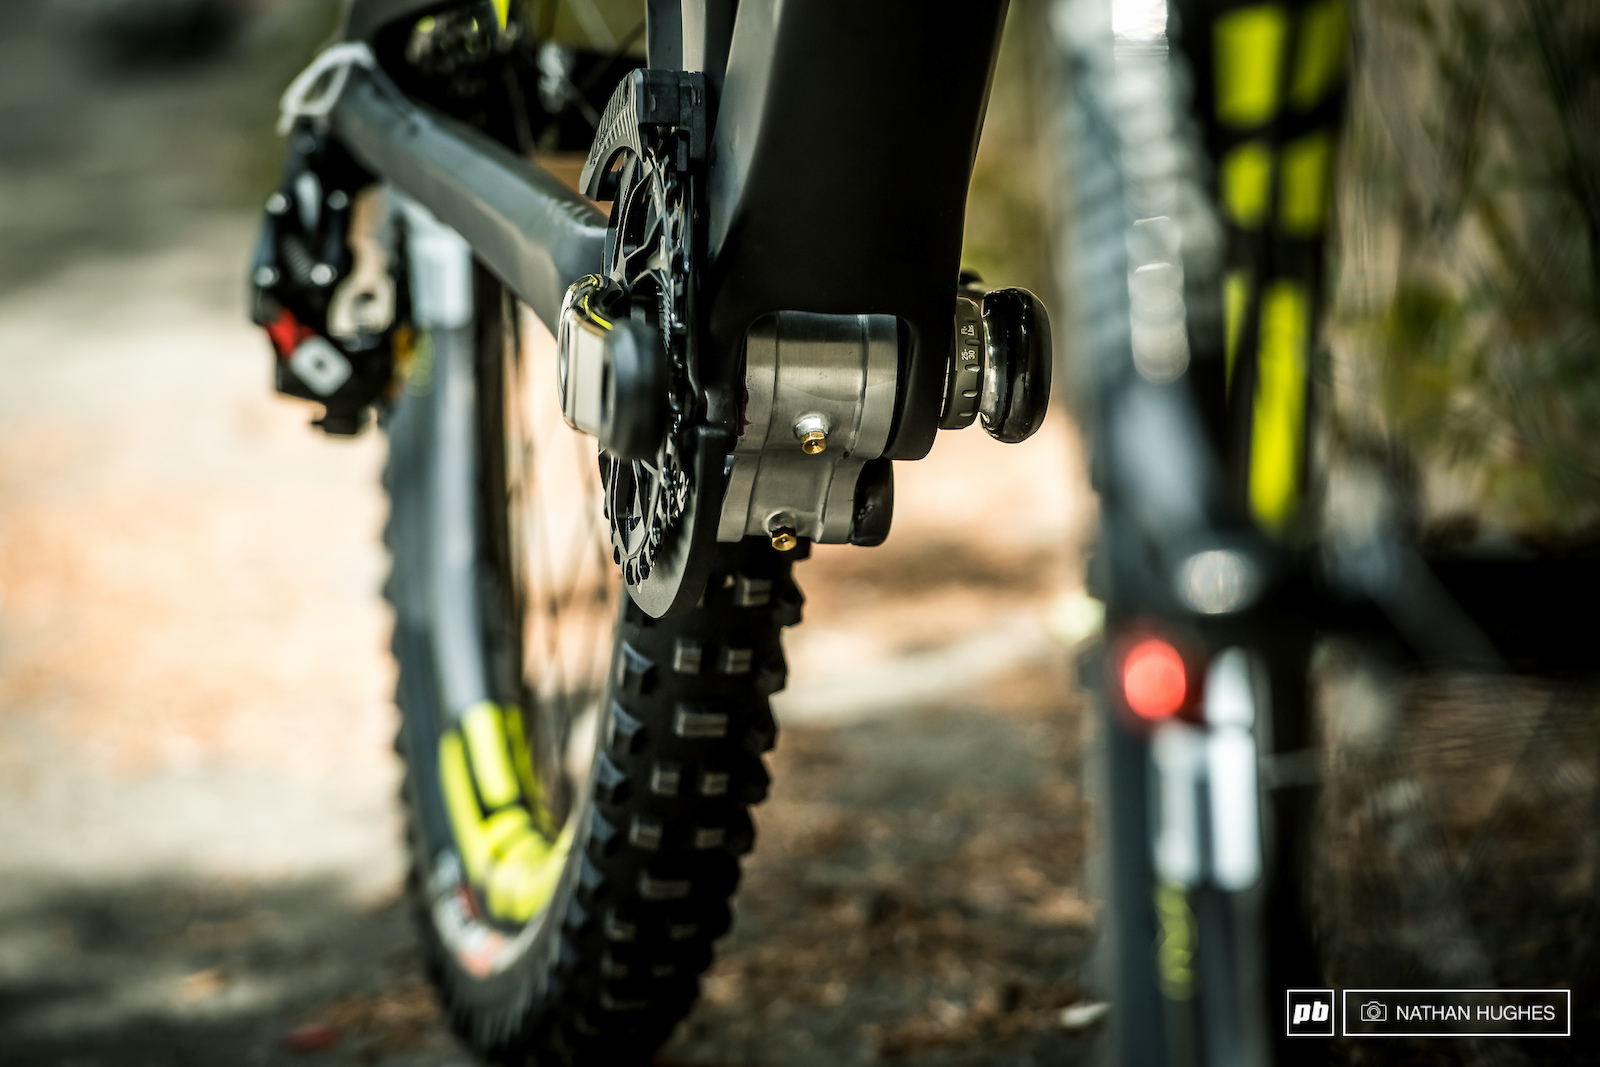 SPOTTED: Intense DH29 Proto